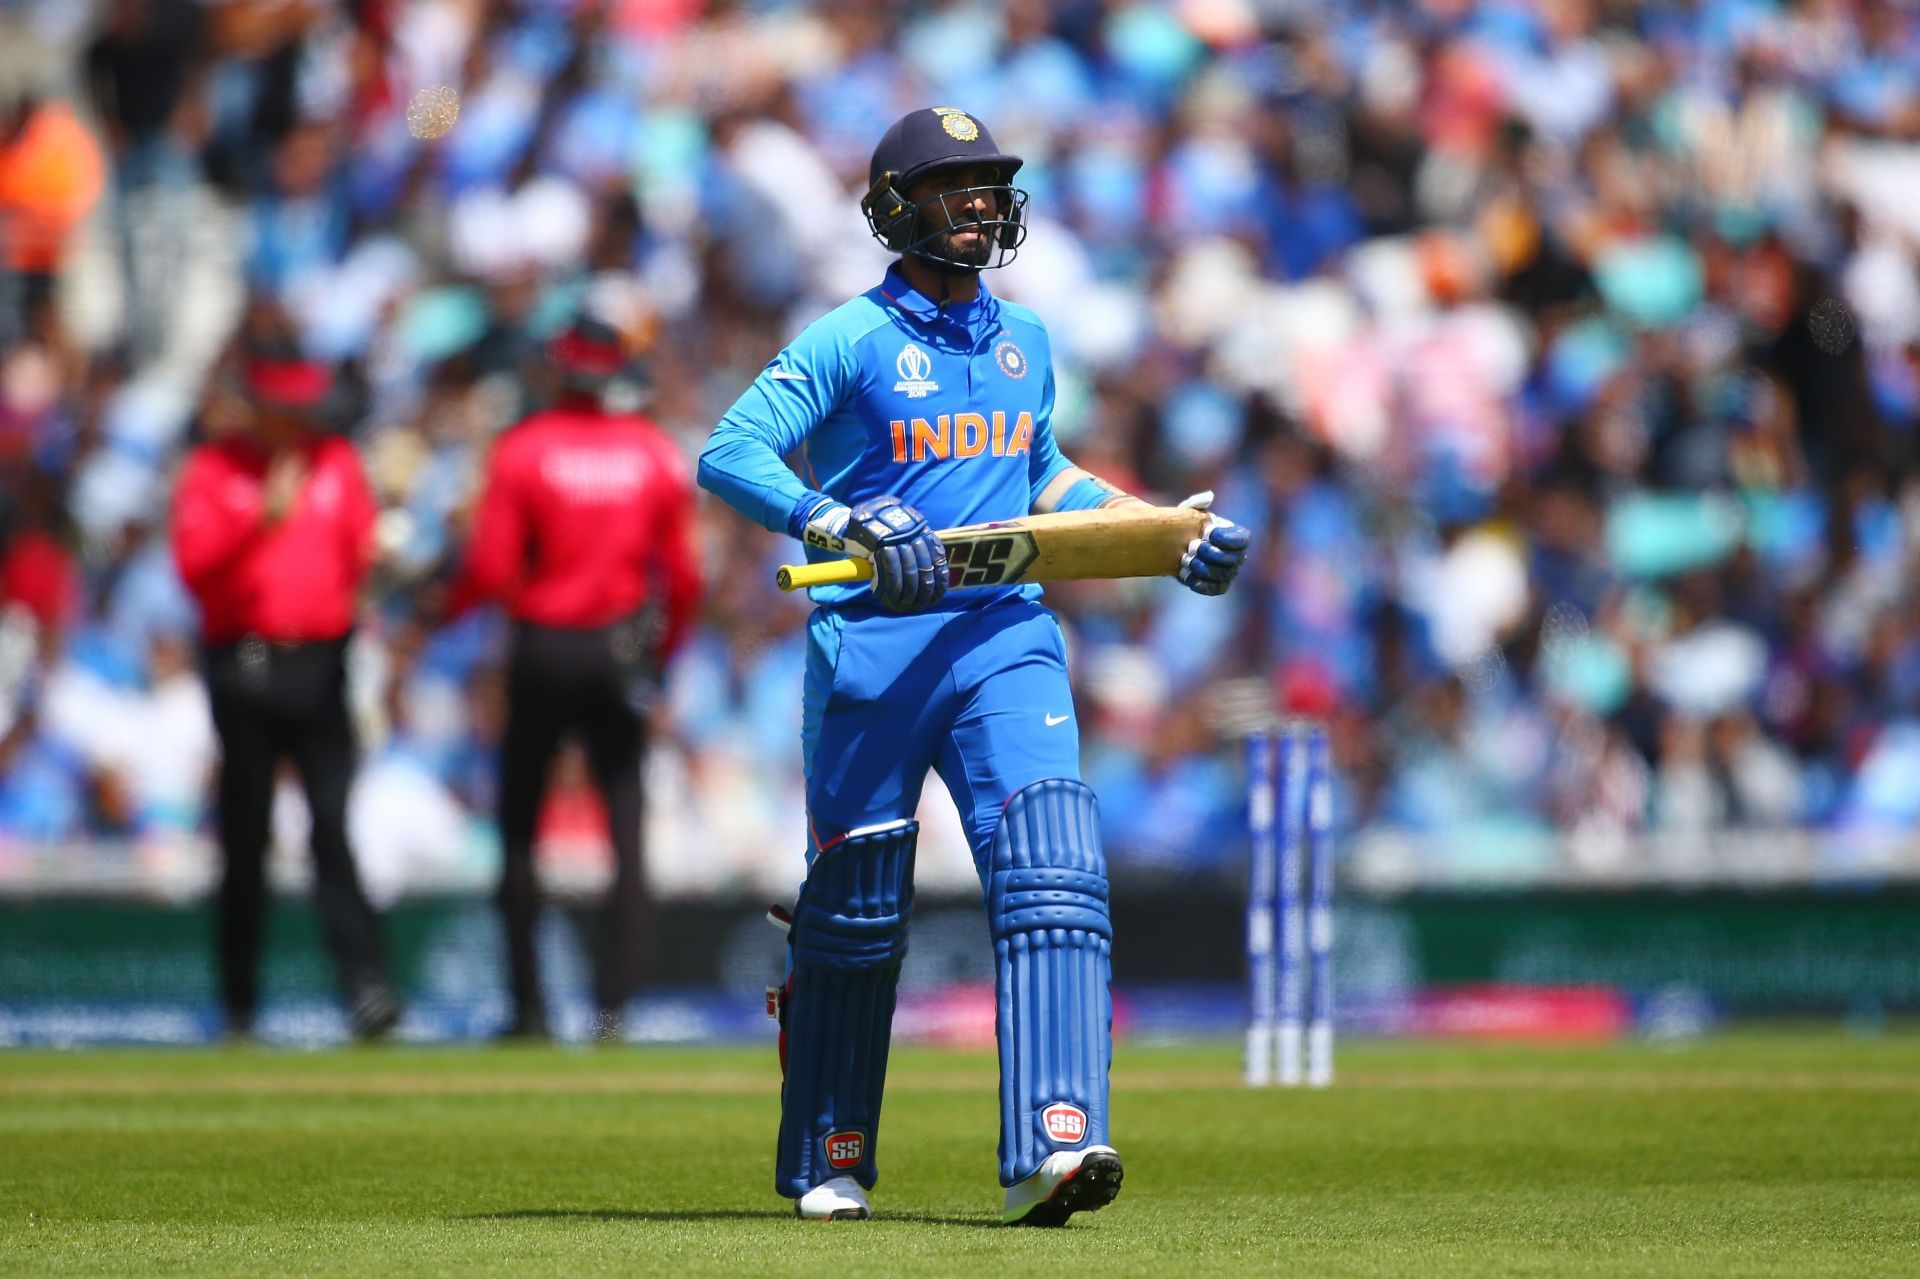 Dinesh Karthik last played for Team India at the 2019 ODI World Cup